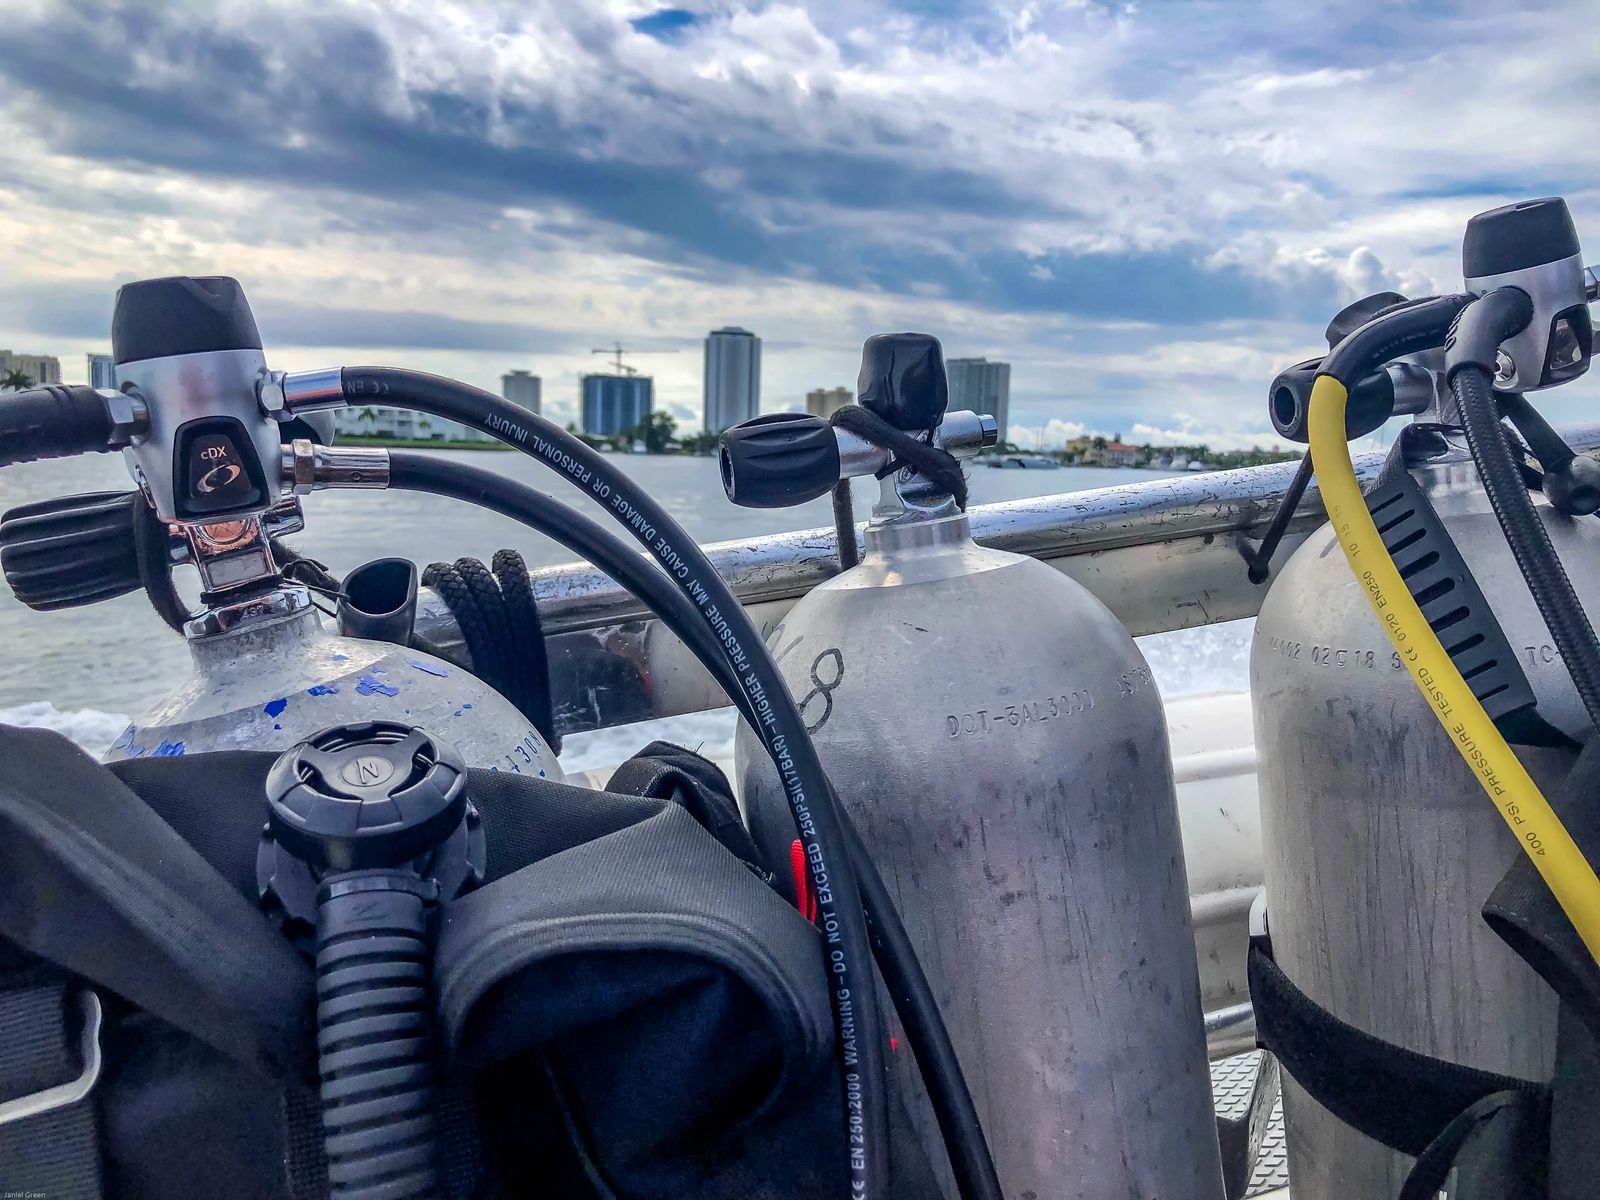 Diving Singer Island Florida - Scuba tanks on a boat rail with singer island hotels in the background